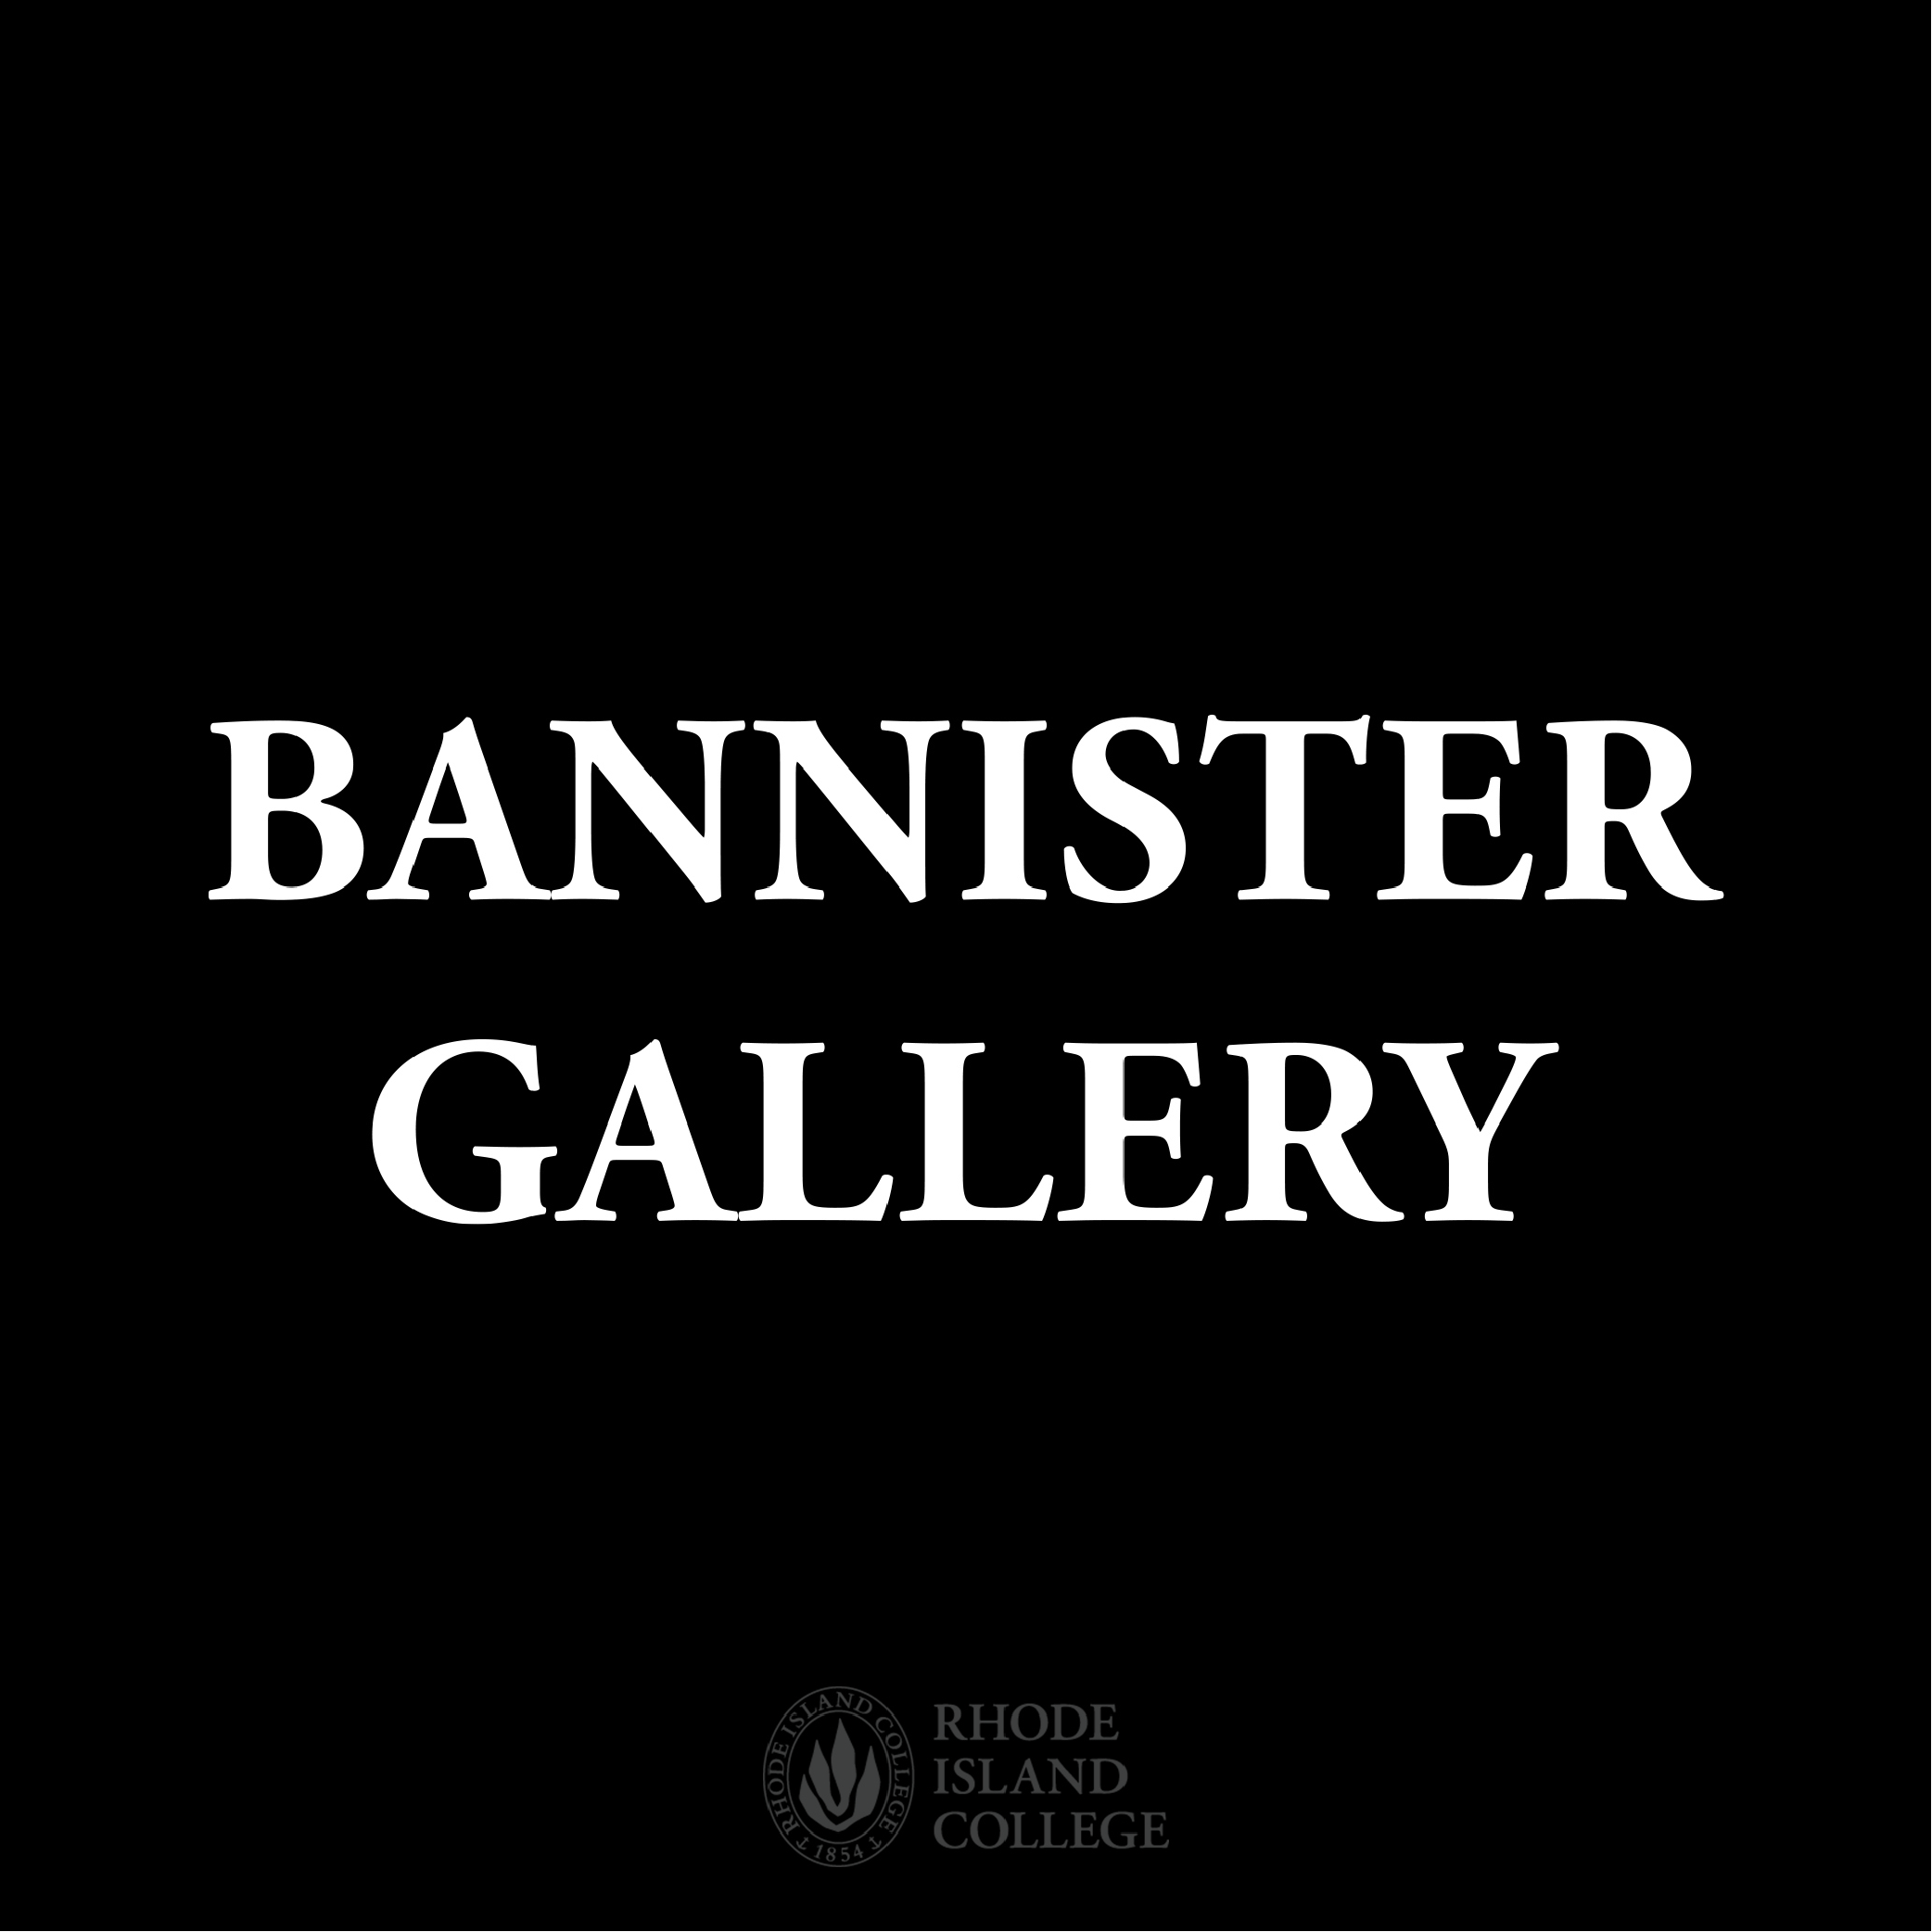 Bannister Gallery at Rhode Island College